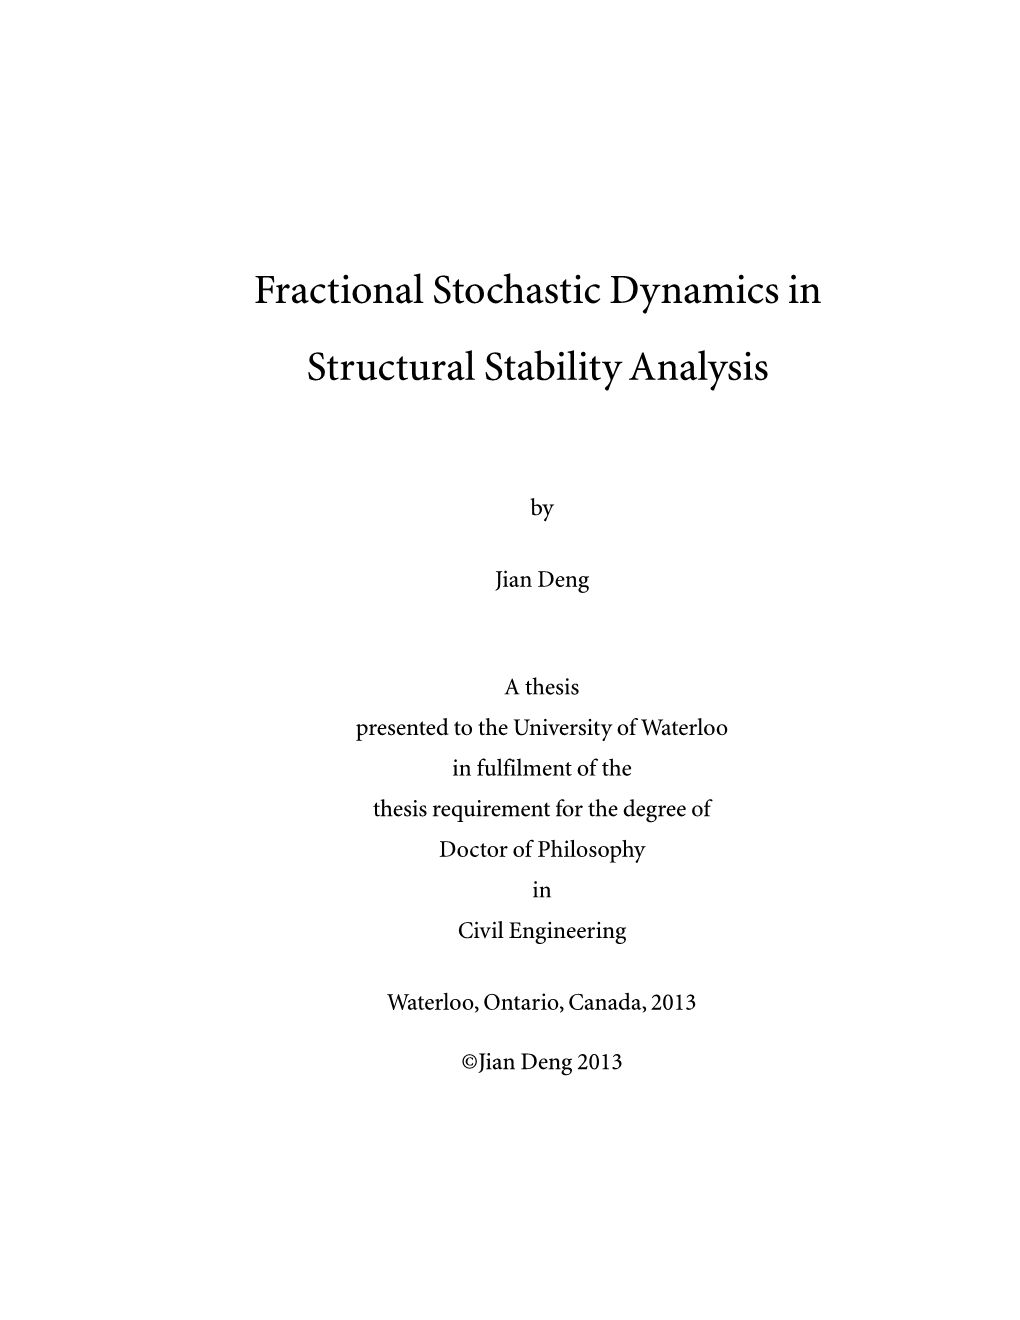 Fractional Stochastic Dynamics in Structural Stability Analysis